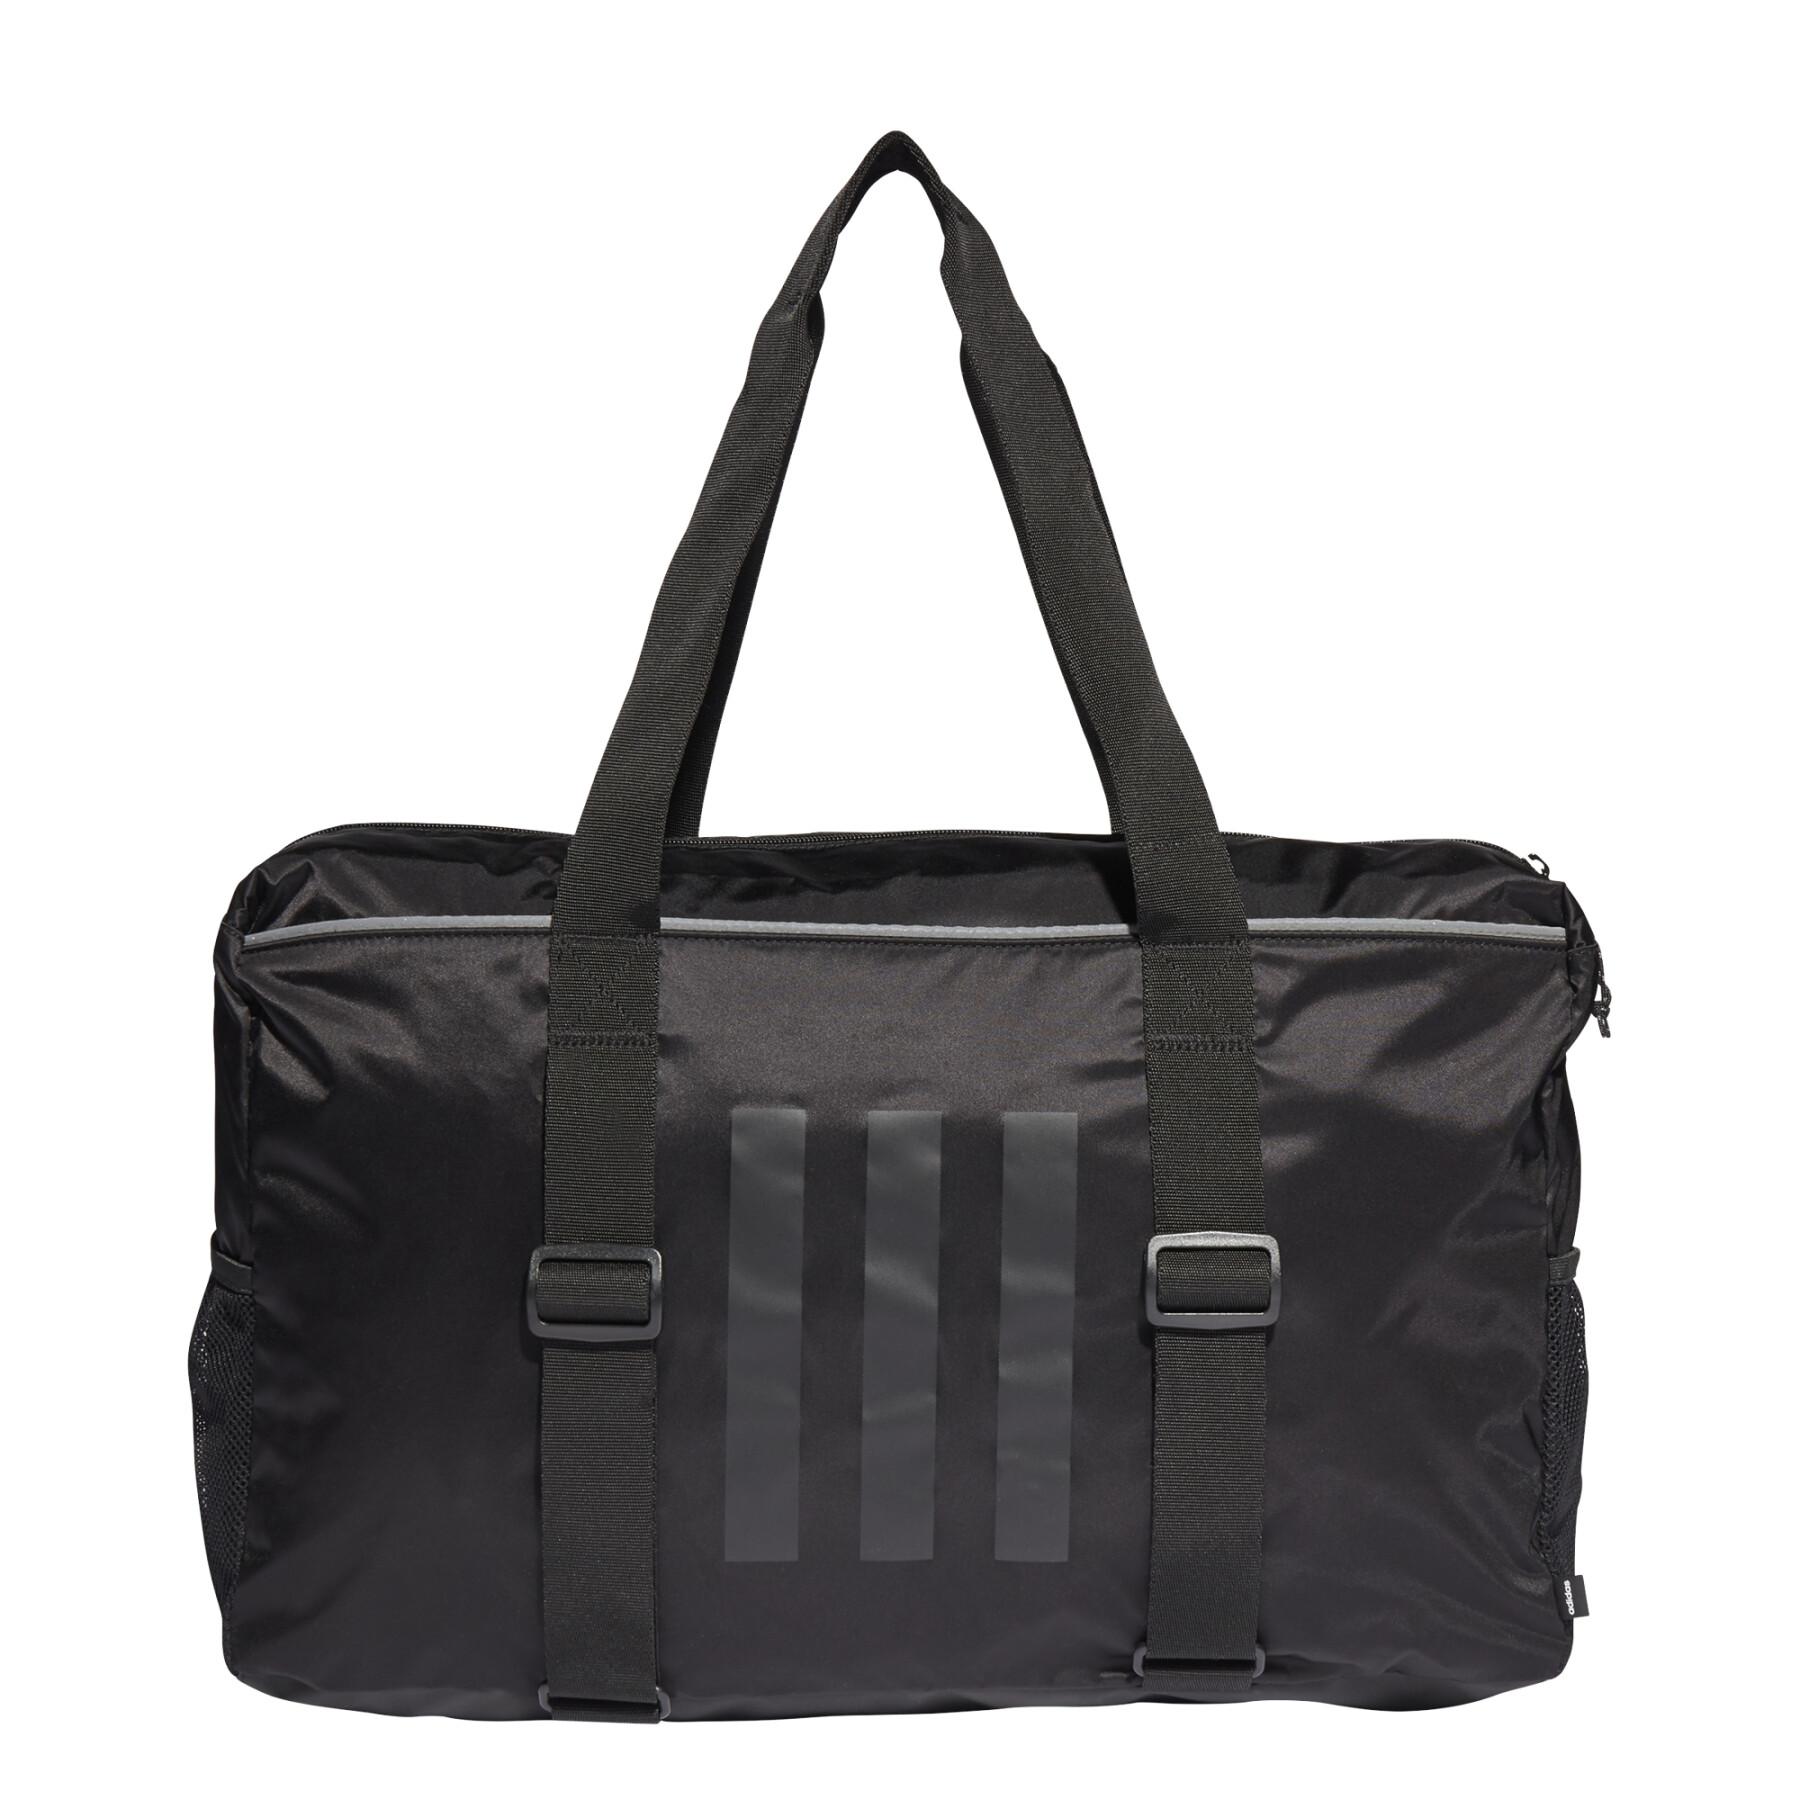 Women's bag adidas Tailored For Her Carry